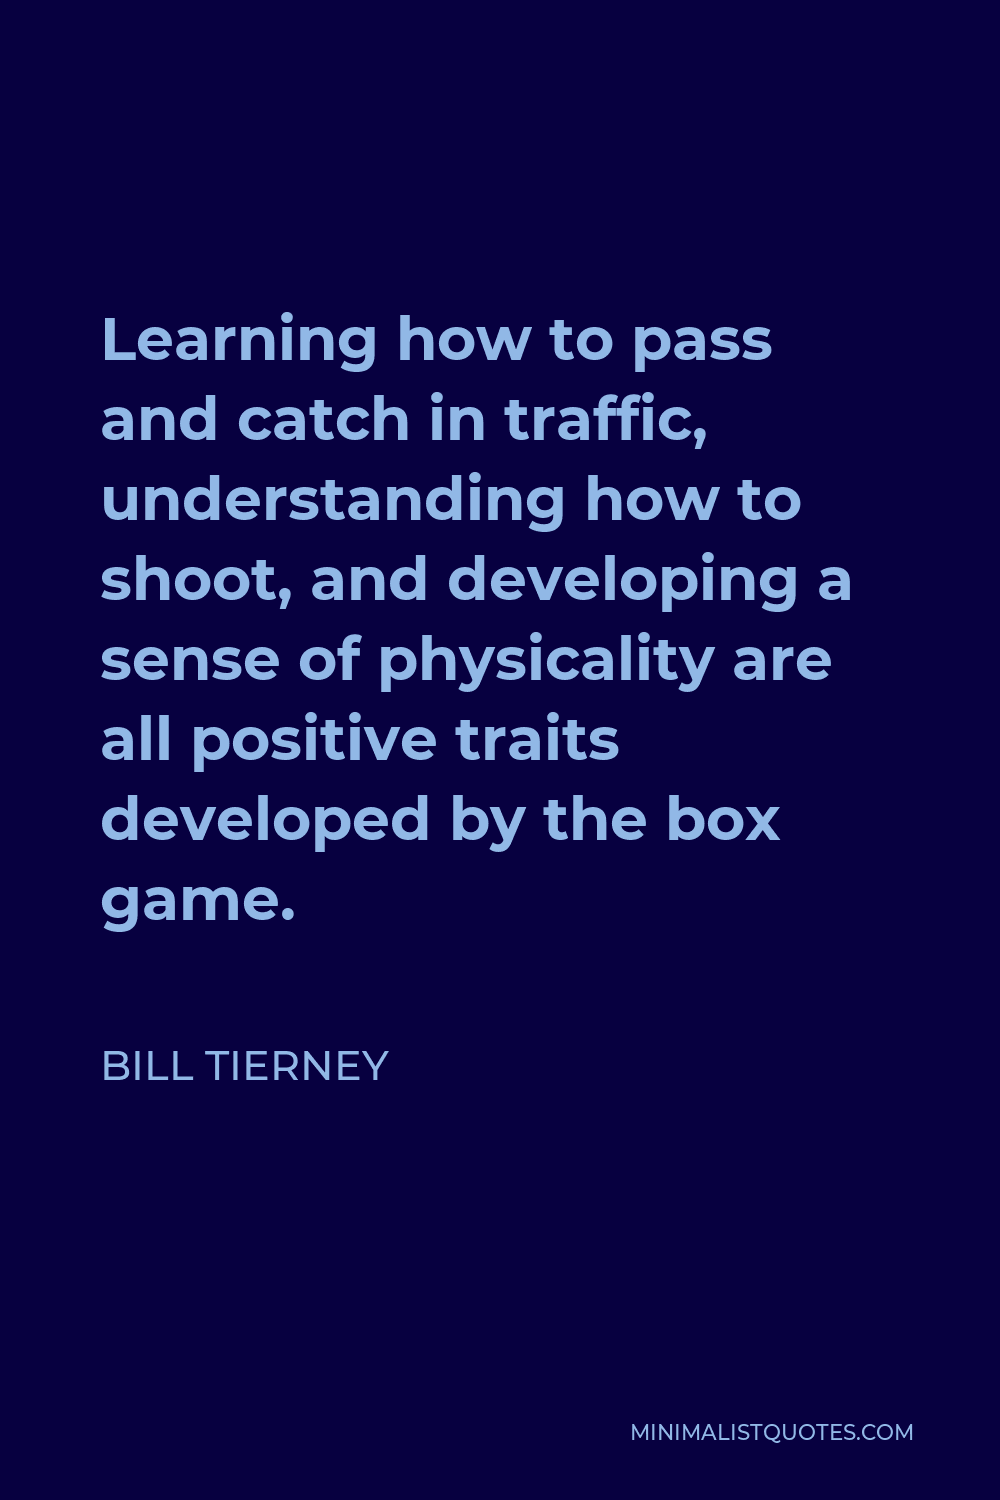 Bill Tierney Quote - Learning how to pass and catch in traffic, understanding how to shoot, and developing a sense of physicality are all positive traits developed by the box game.